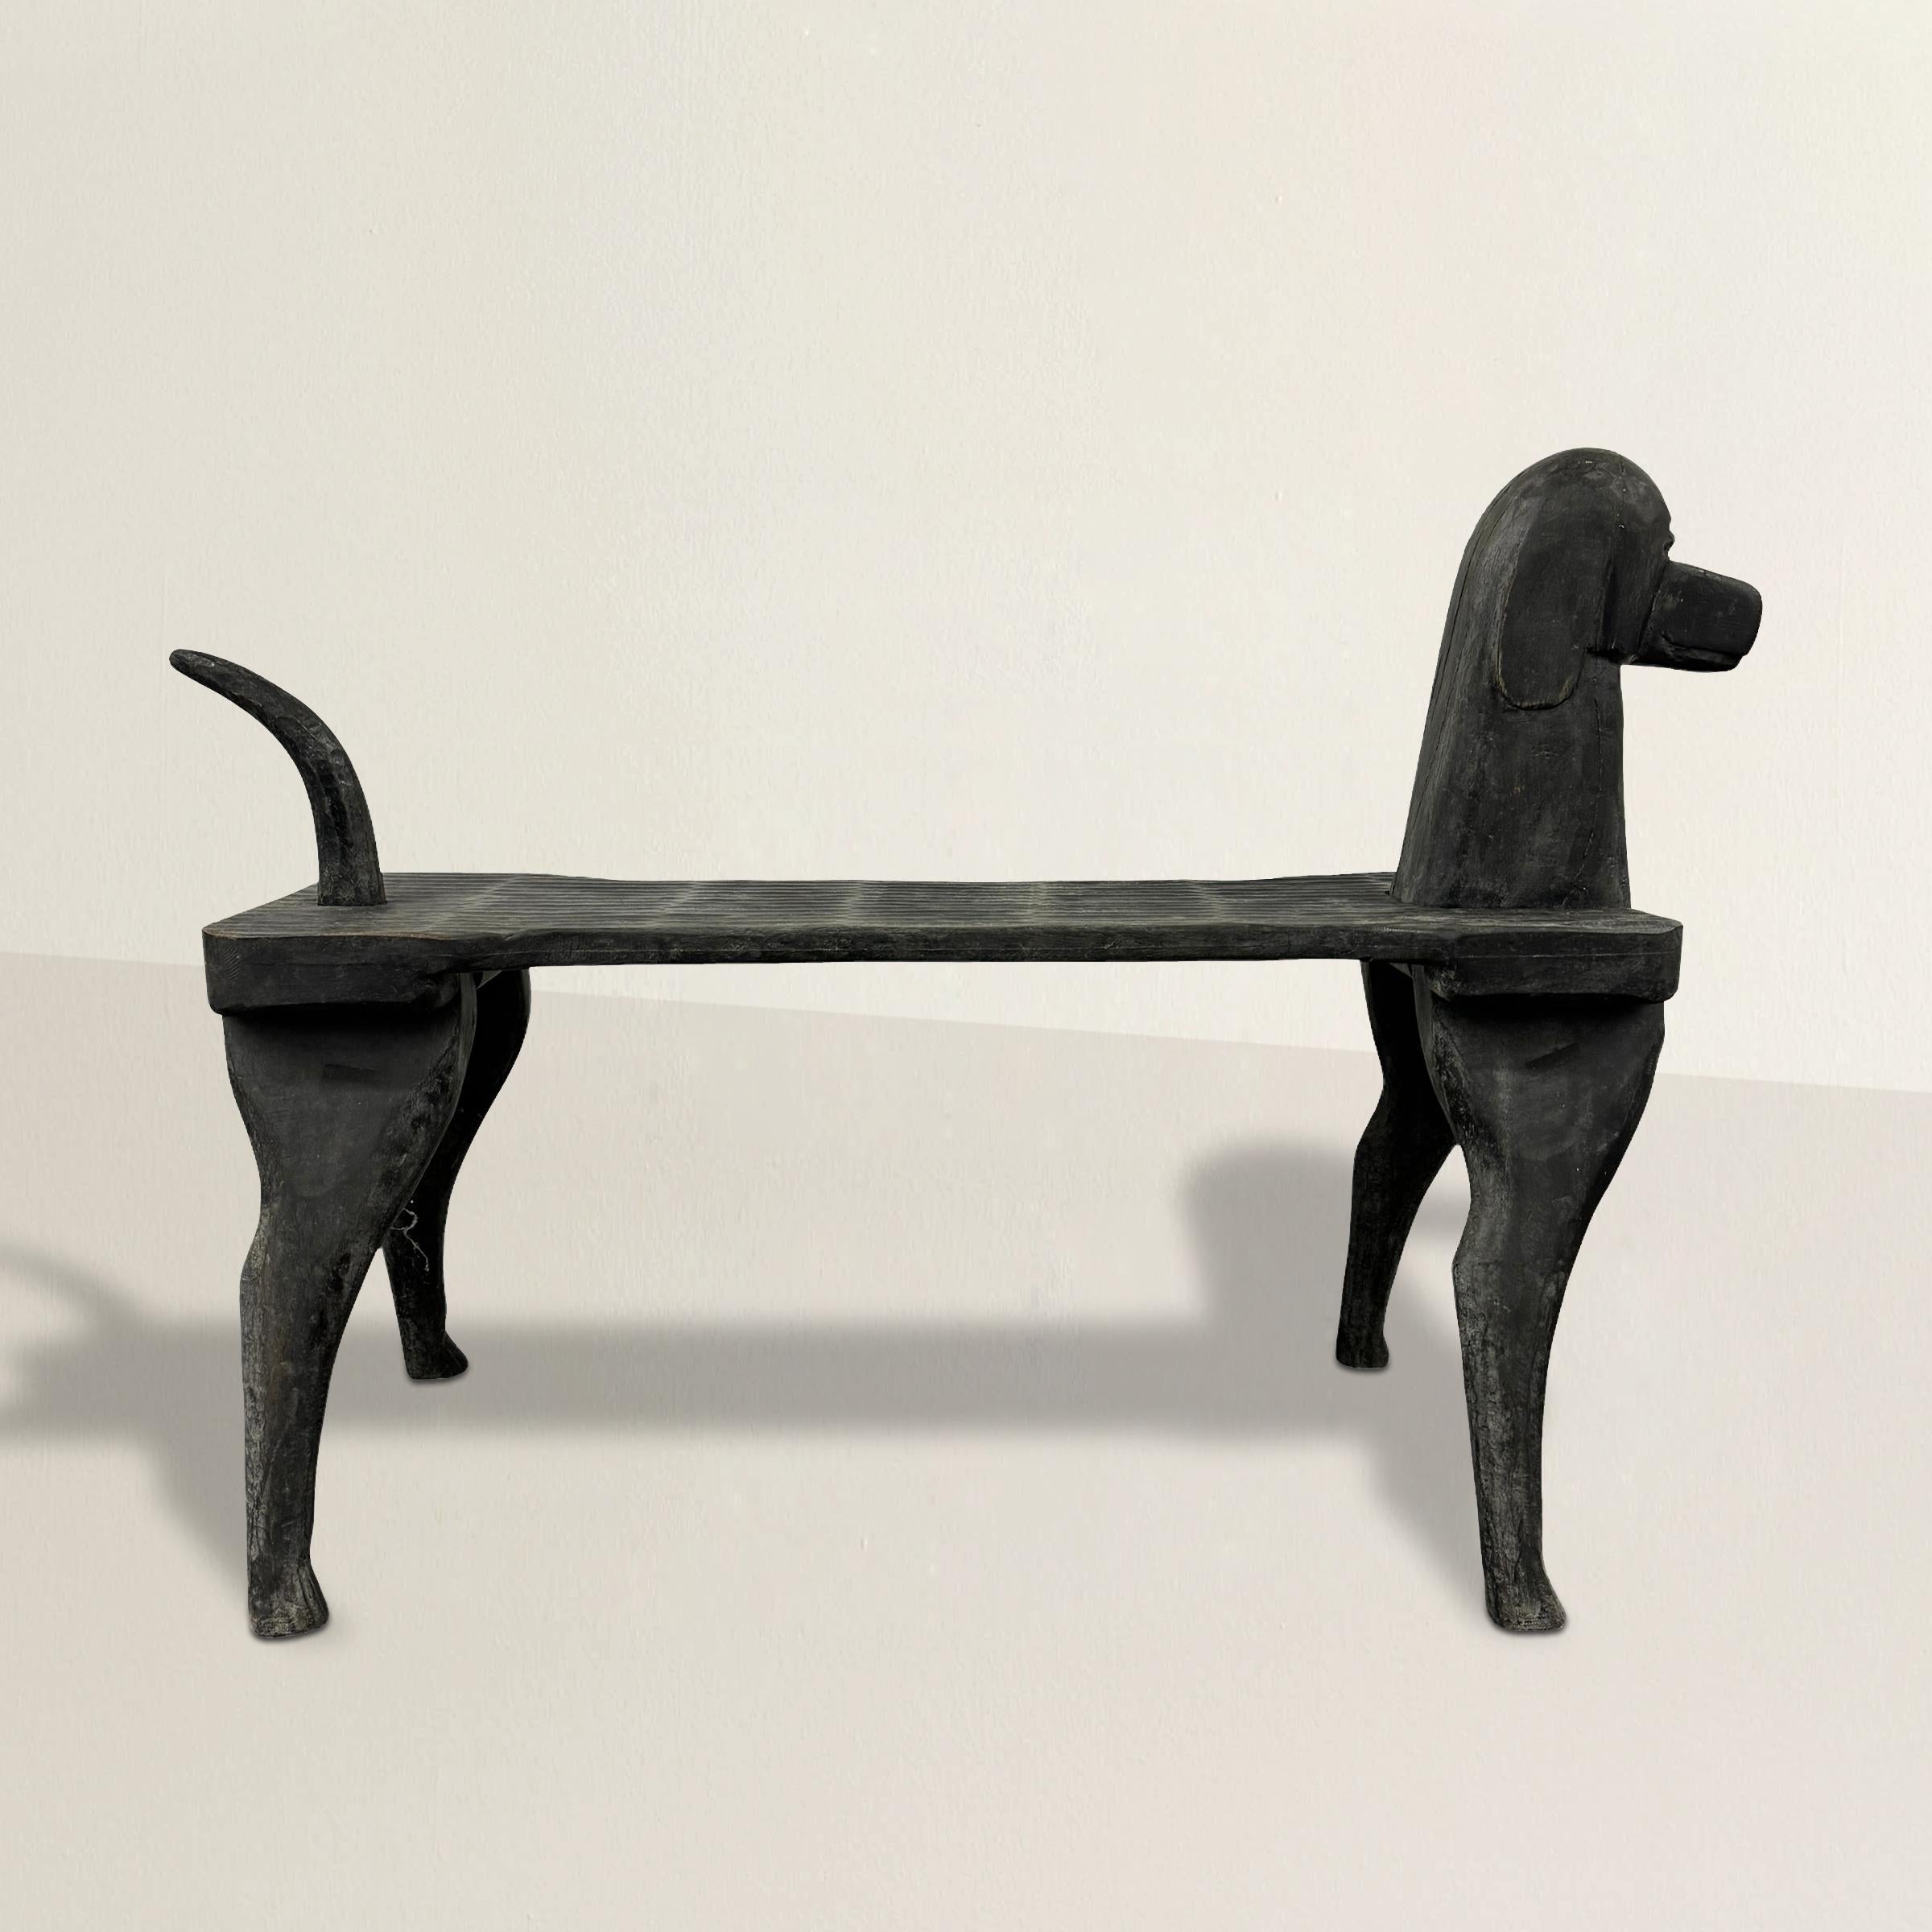 Stephen Husek, a renowned American folk artist, left behind a legacy of creativity and craftsmanship that continues to inspire today. This hand-carved wood dog bench, featuring Husek's beloved black lab, is a prime example of his extraordinary